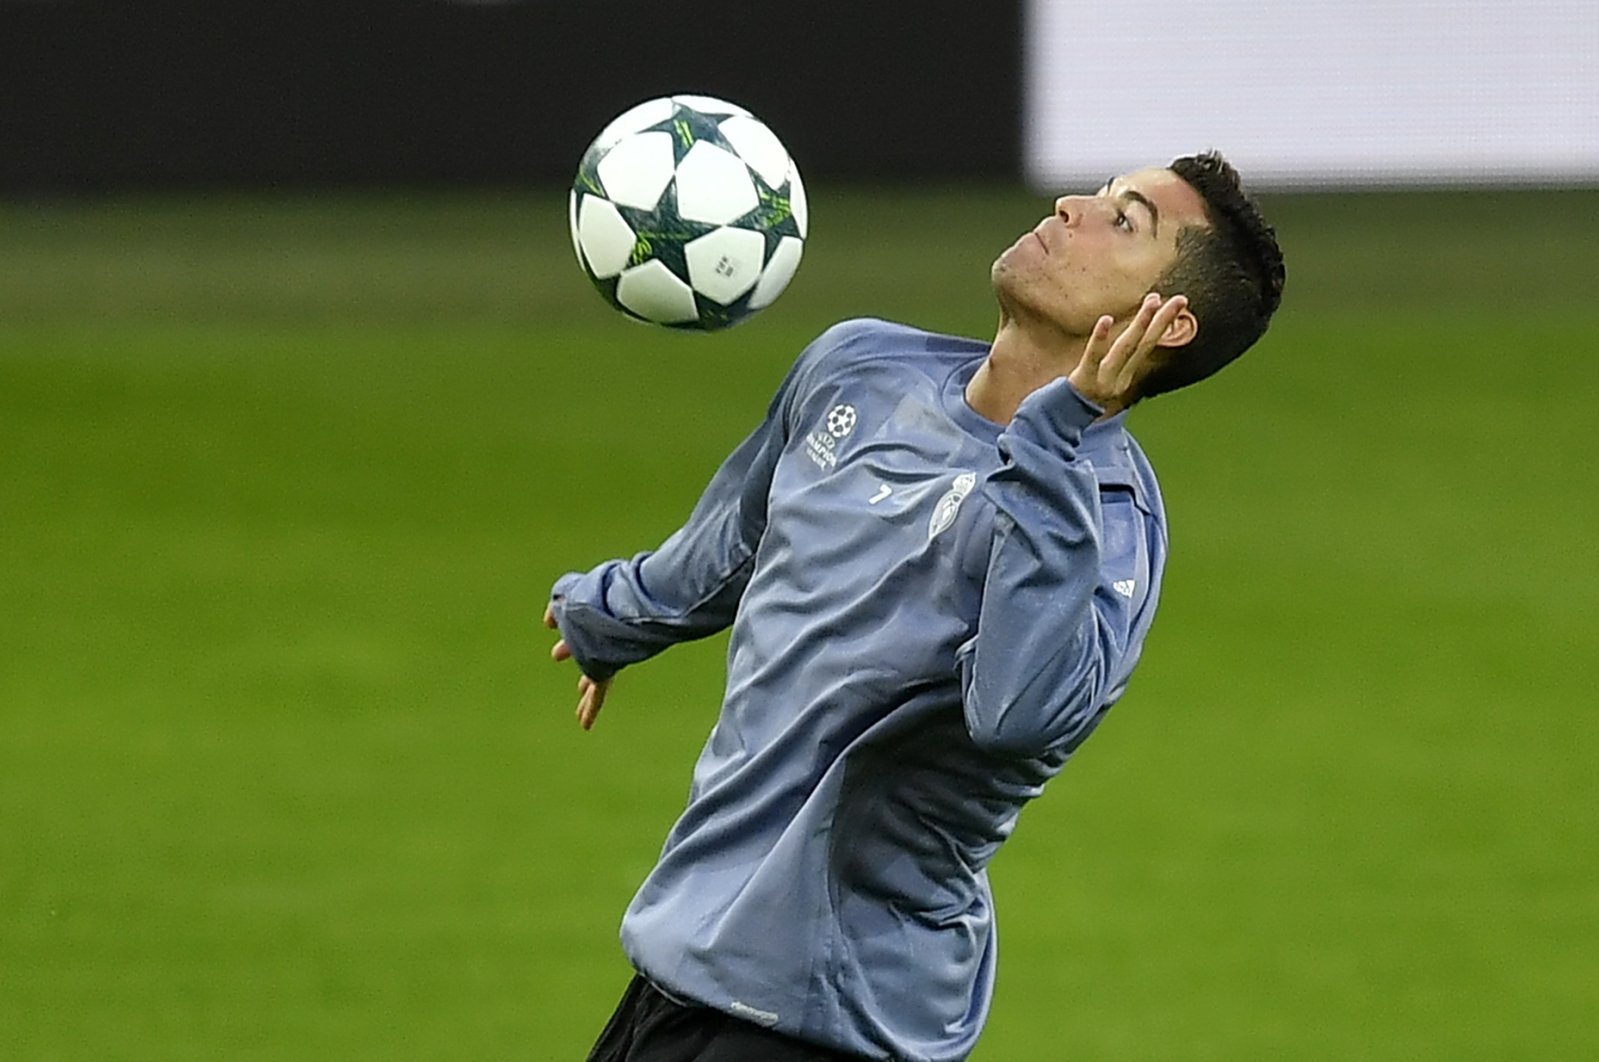 Real Madrid's Christiano Ronaldo jumps for the ball during a training session prior to the Champions League Group F soccer match between Borussia Dortmund and Real Madrid at the stadium in Dortmund, Germany, Monday, Sept. 26, 2016. (AP File Photo)